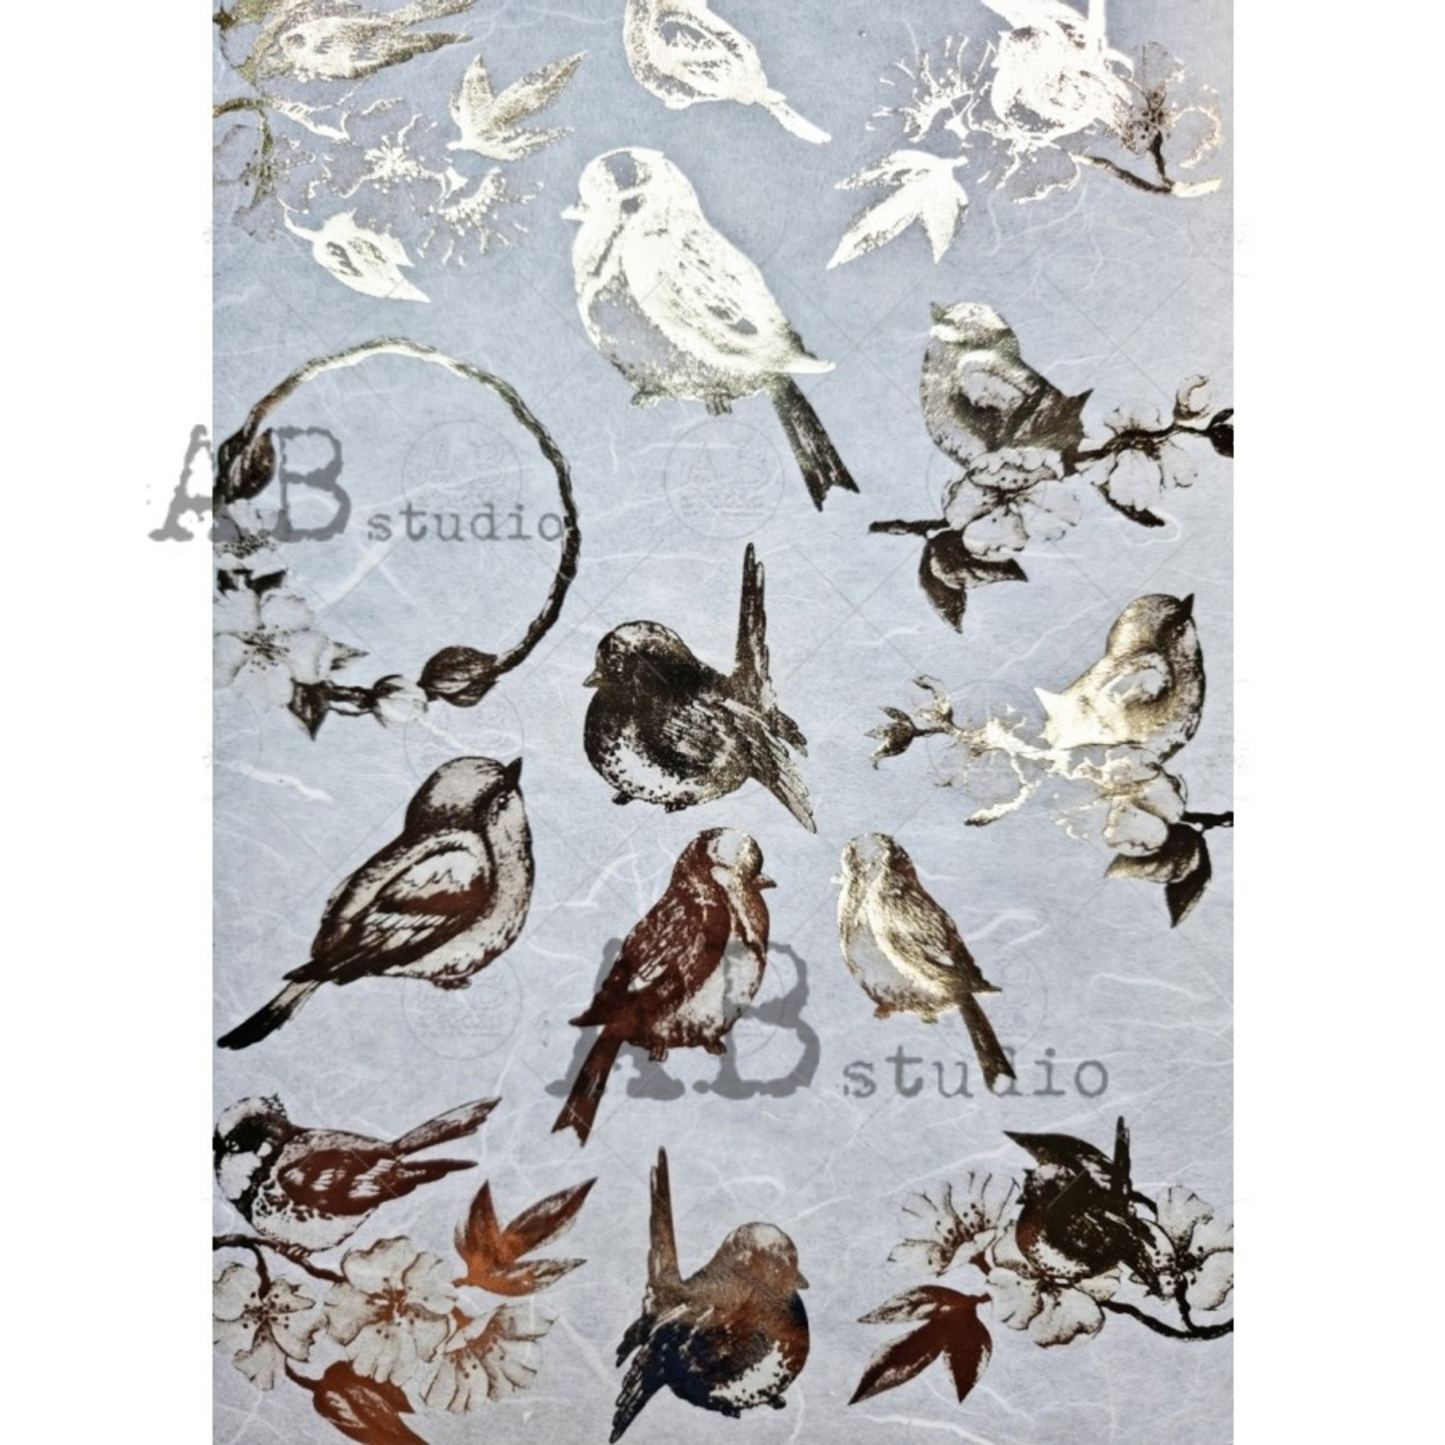 Gilded Birds decoupage rice paper by AB Studio. Size A4 available at Milton's Daughter.